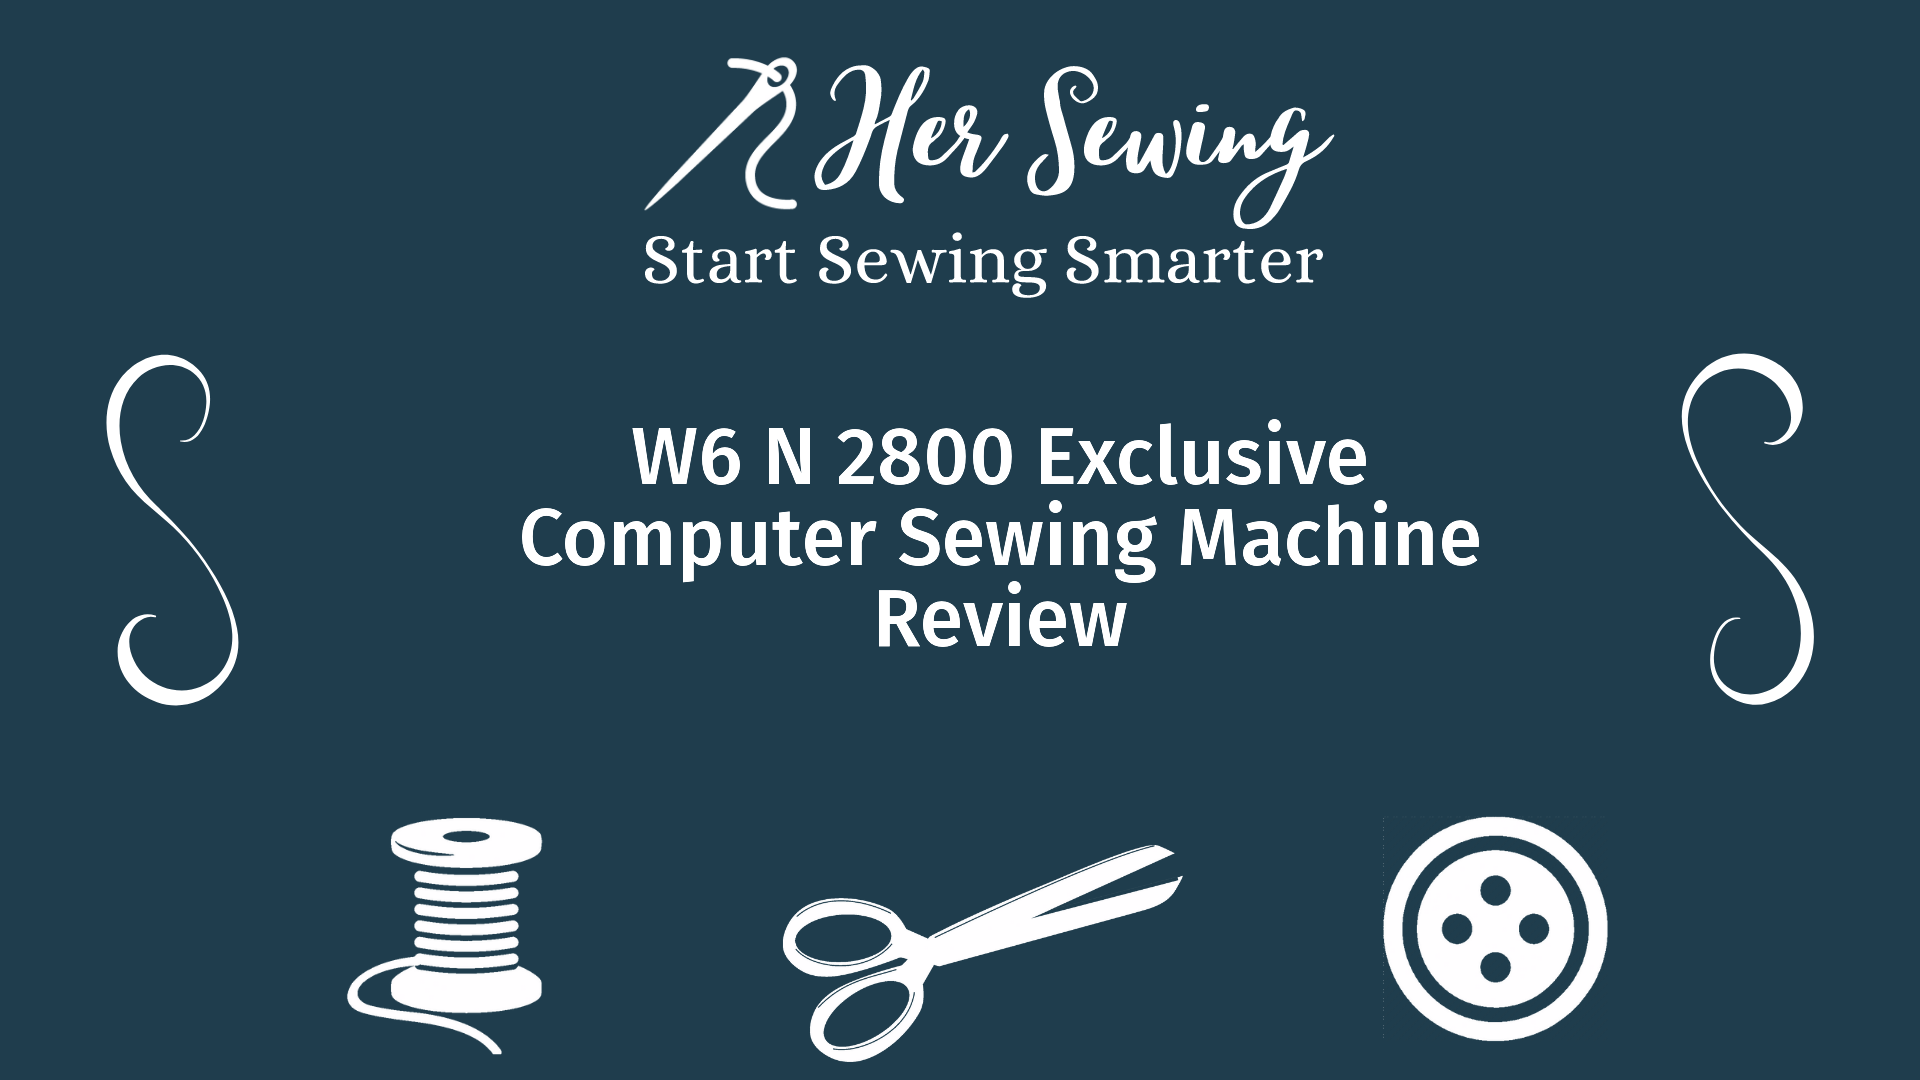 W6 N 2800 Exclusive Computer Sewing Machine Review